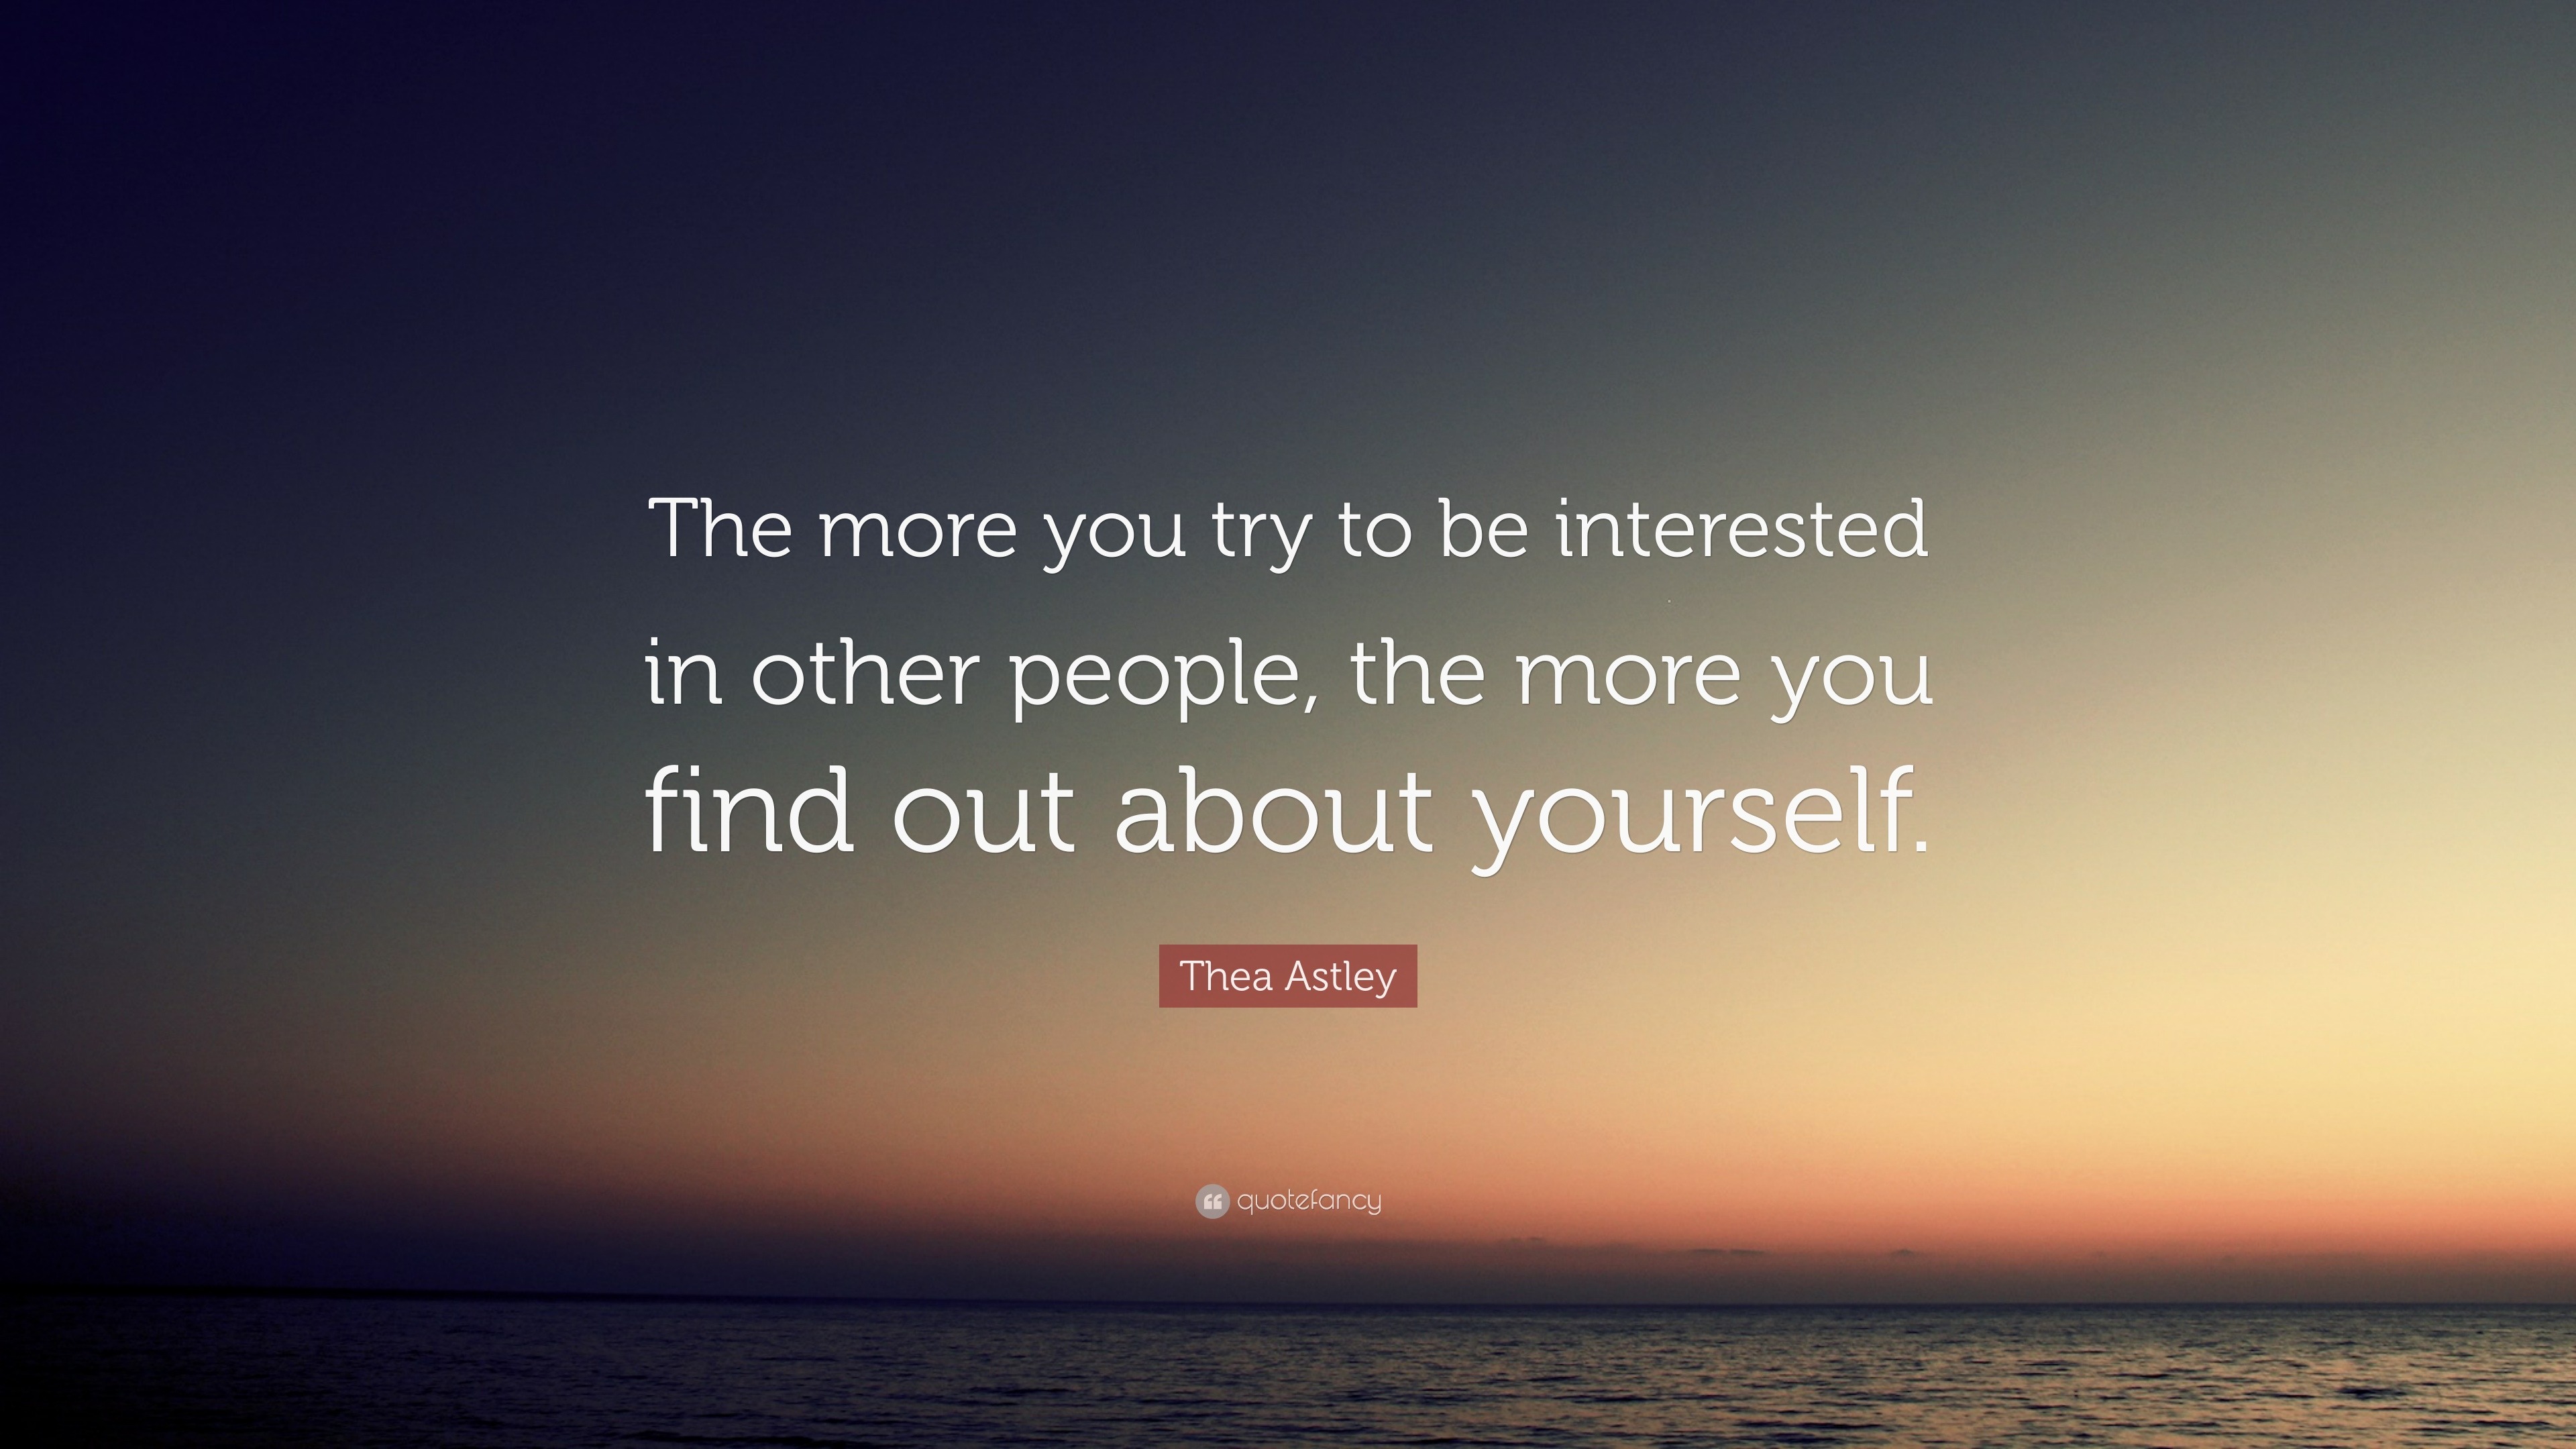 Thea Astley Quote: “The more you try to be interested in other people ...